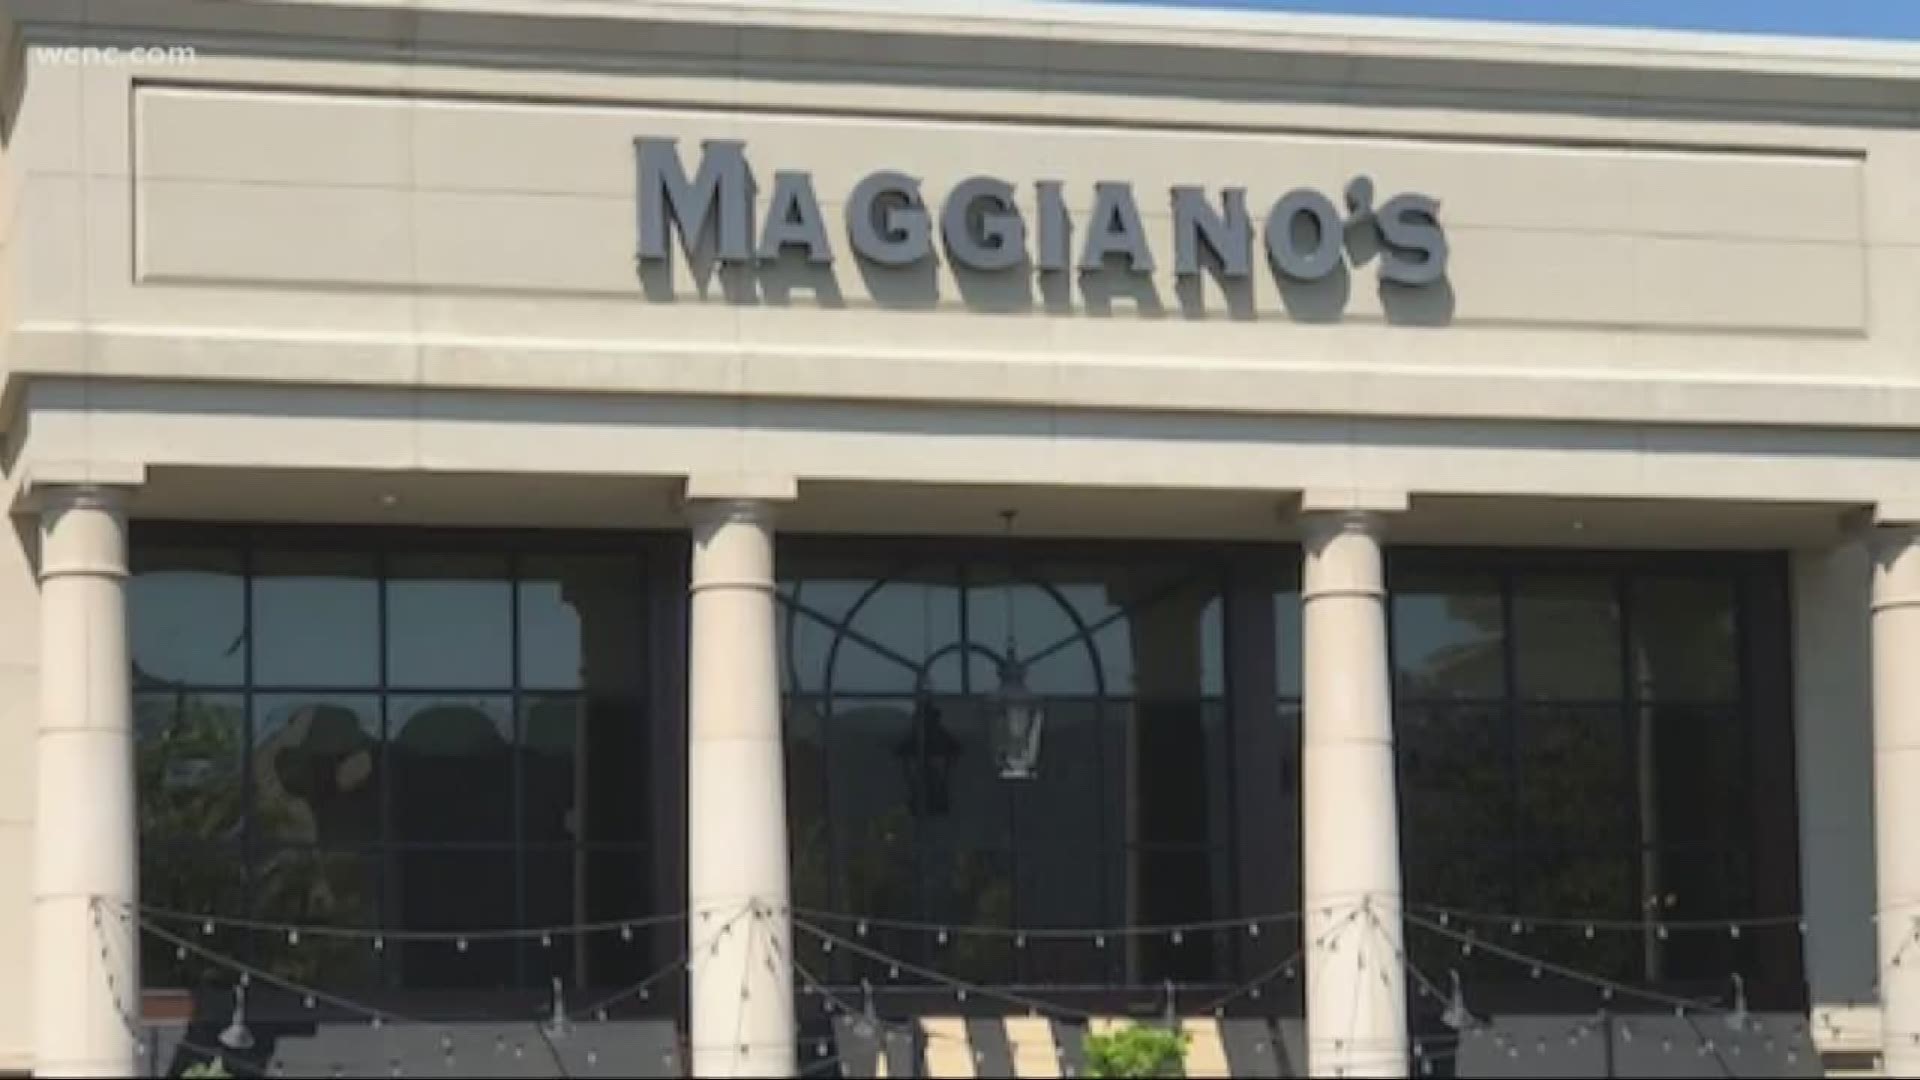 Maggiano's is a popular spot, especially on prom night and weekends.